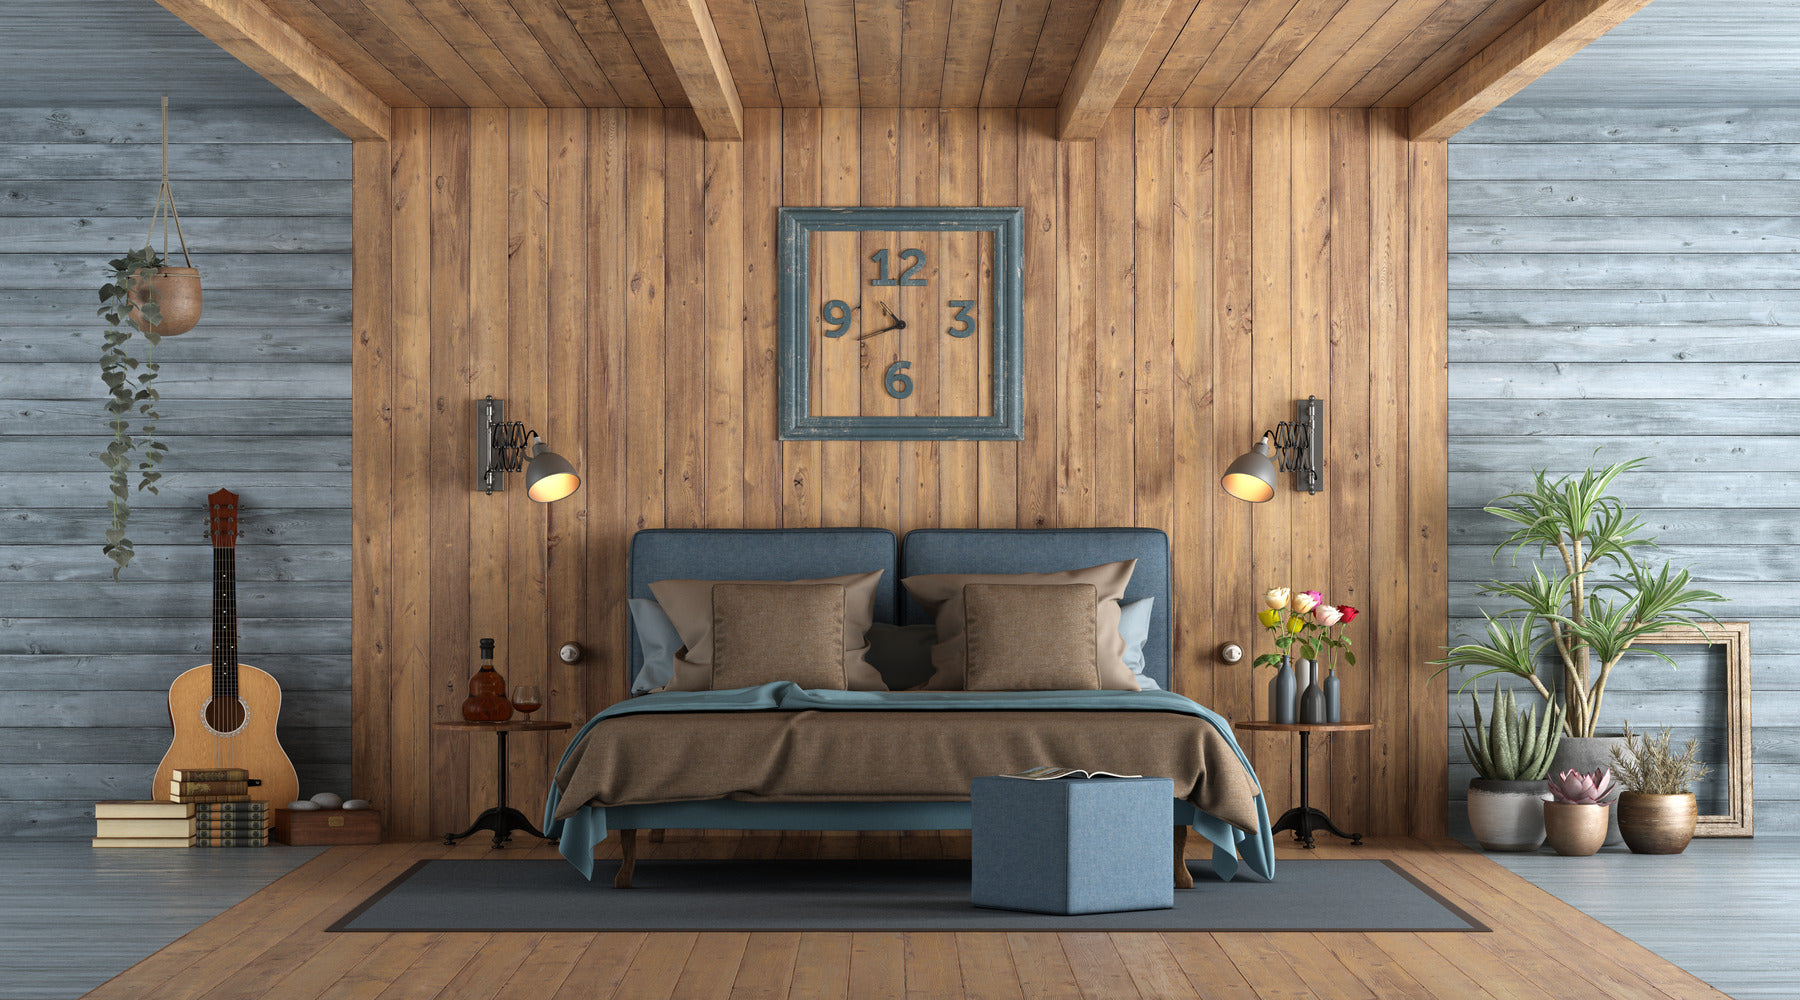 Wall sconces mounted on each side of bed in rustic style master bedroom